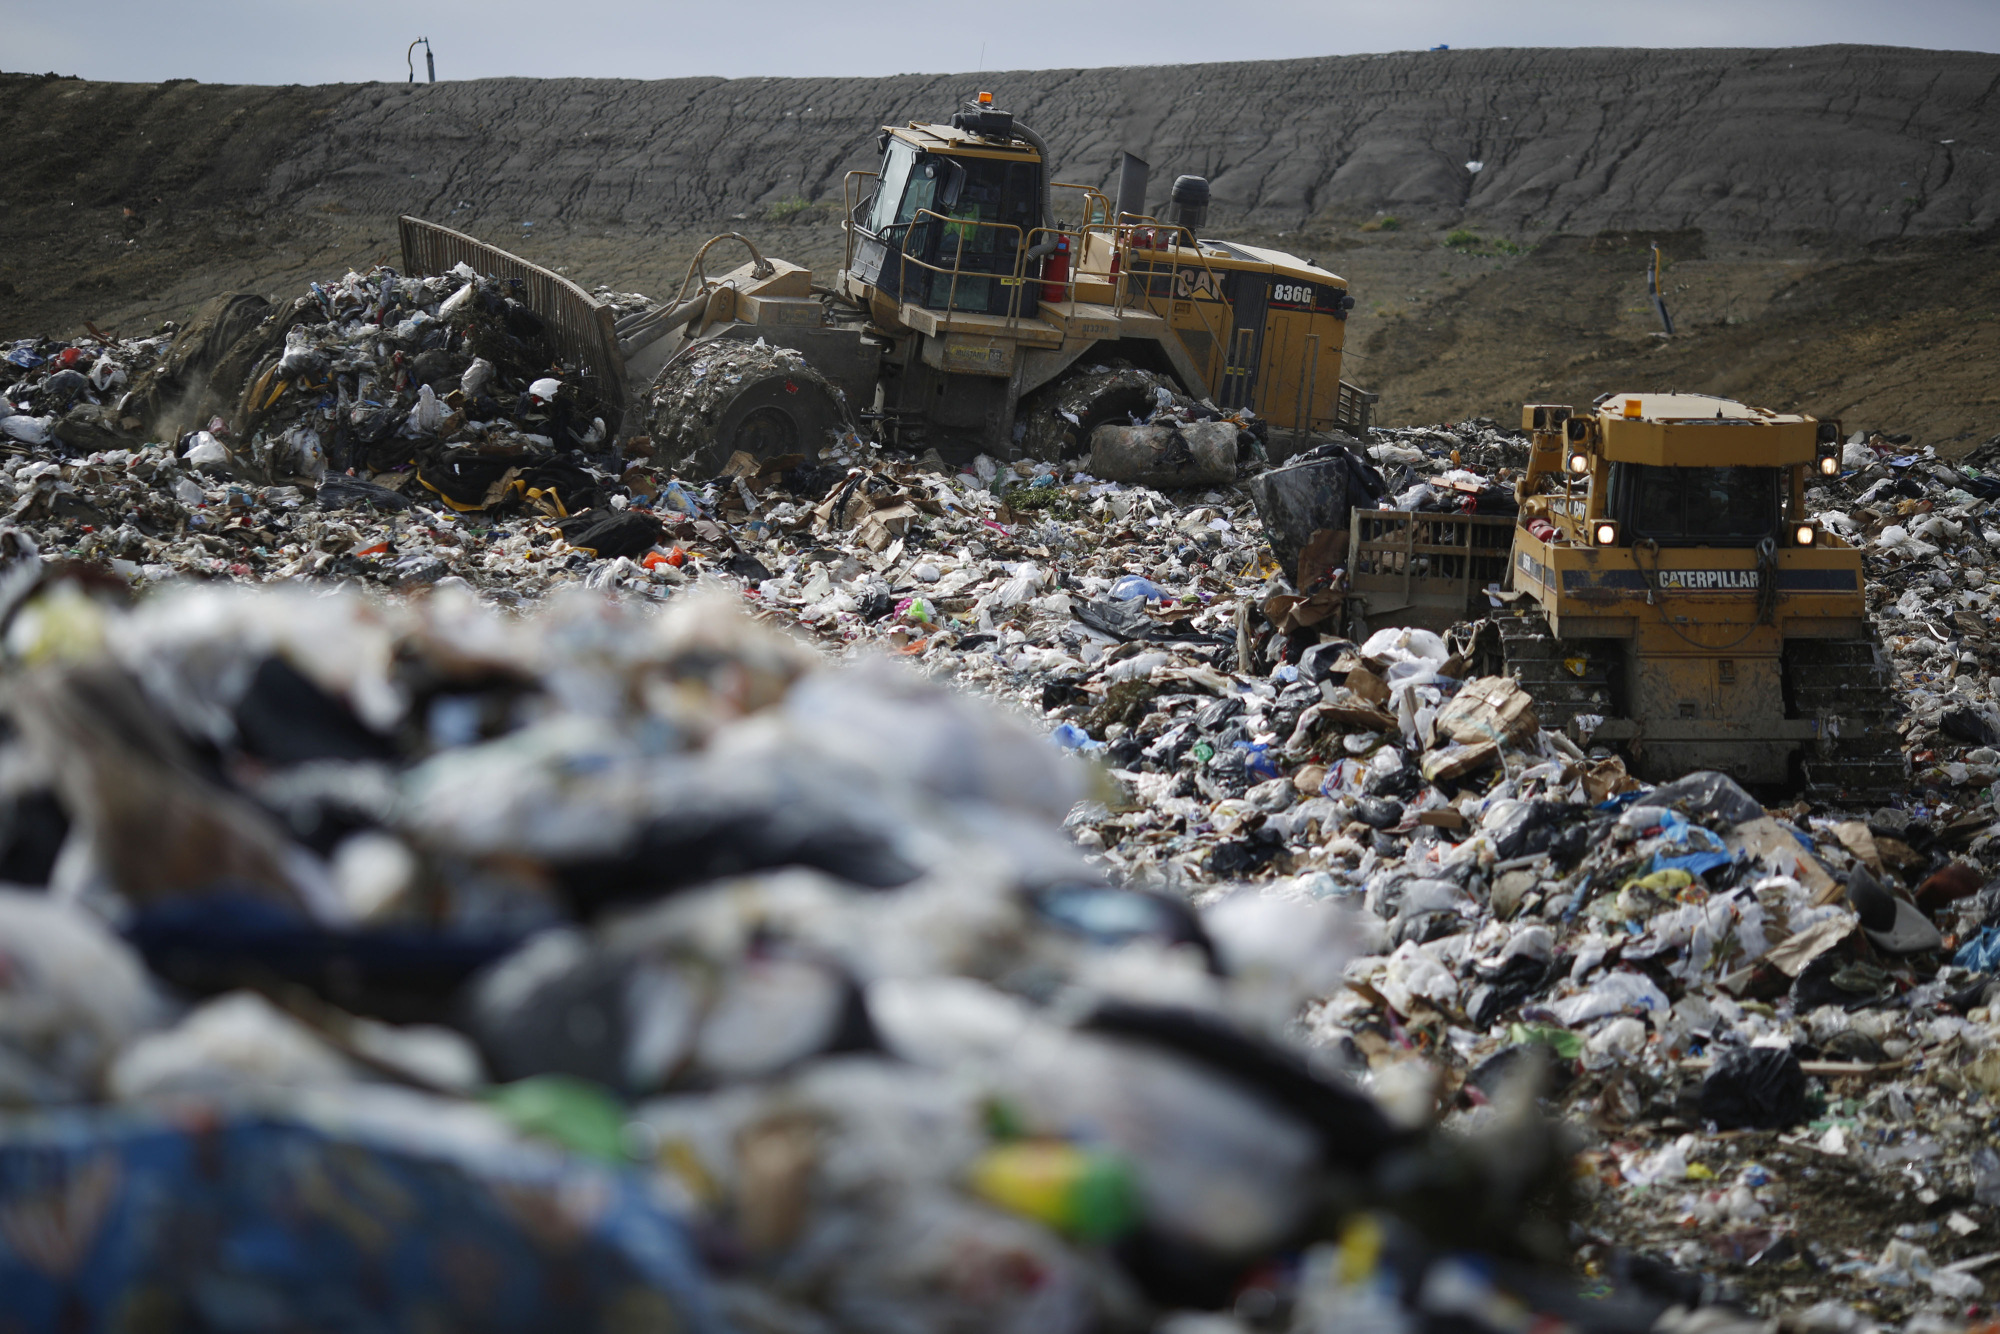 Companies pioneer recycling before regulations take effect